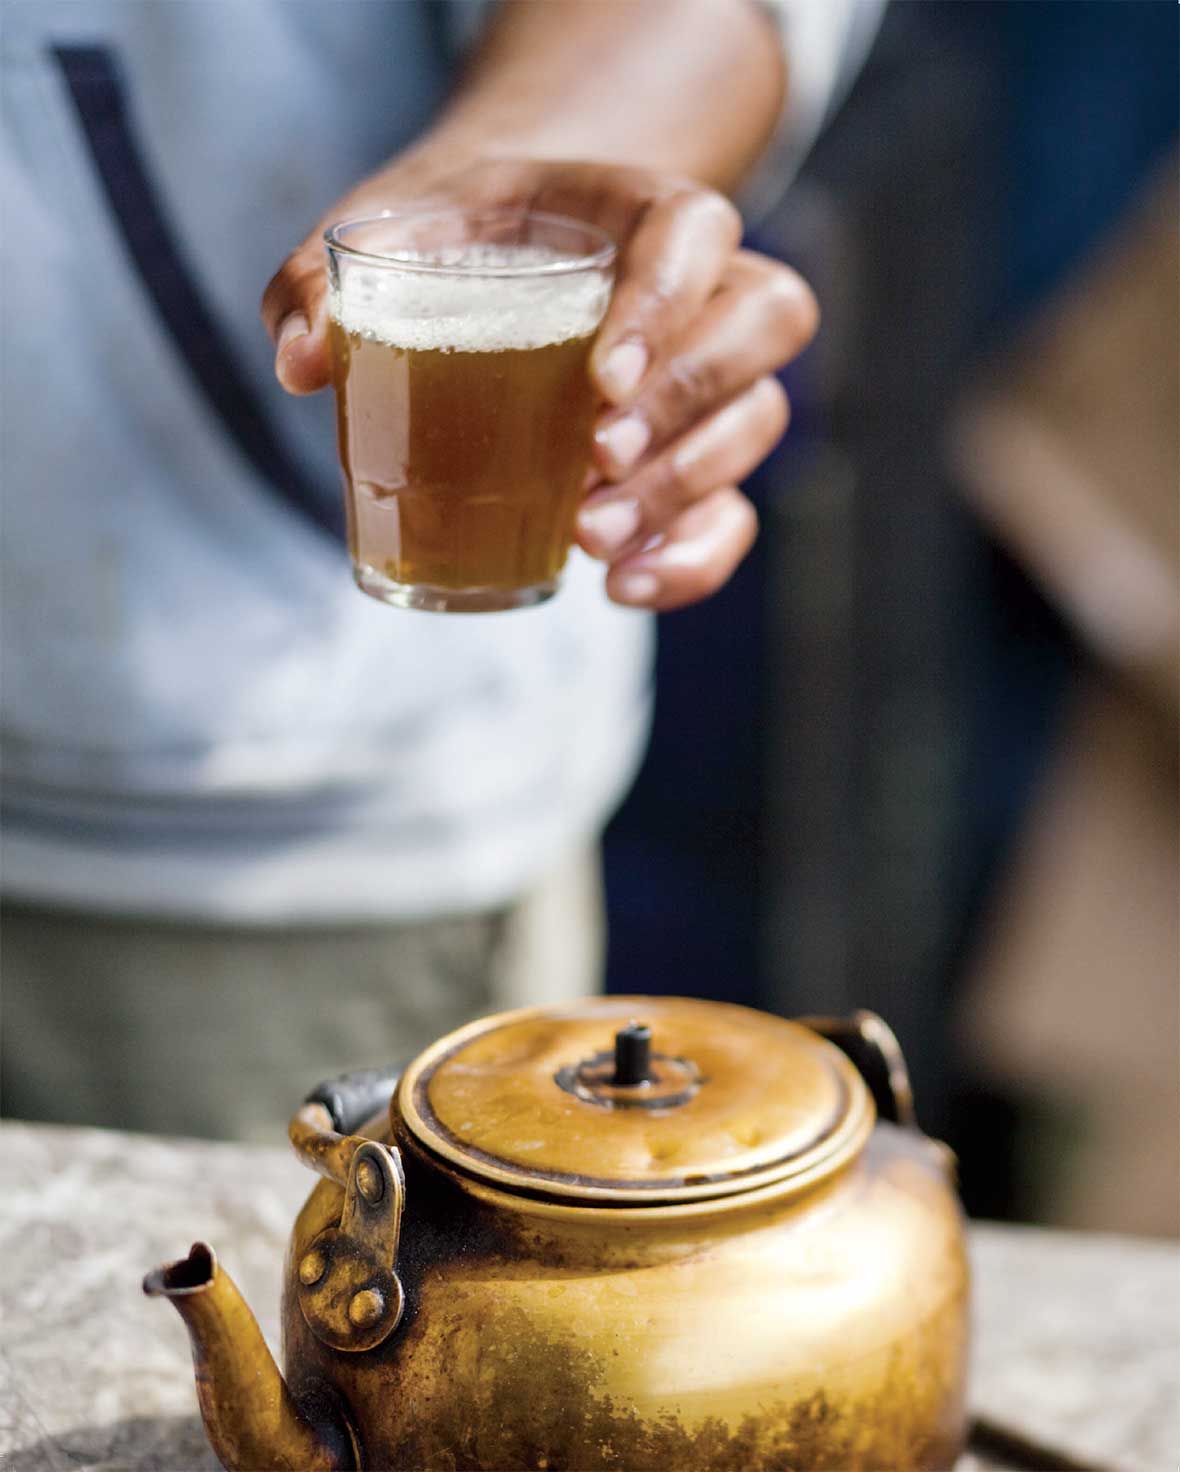 A tumbler filled with amber liquid and a teapot in the foreground.